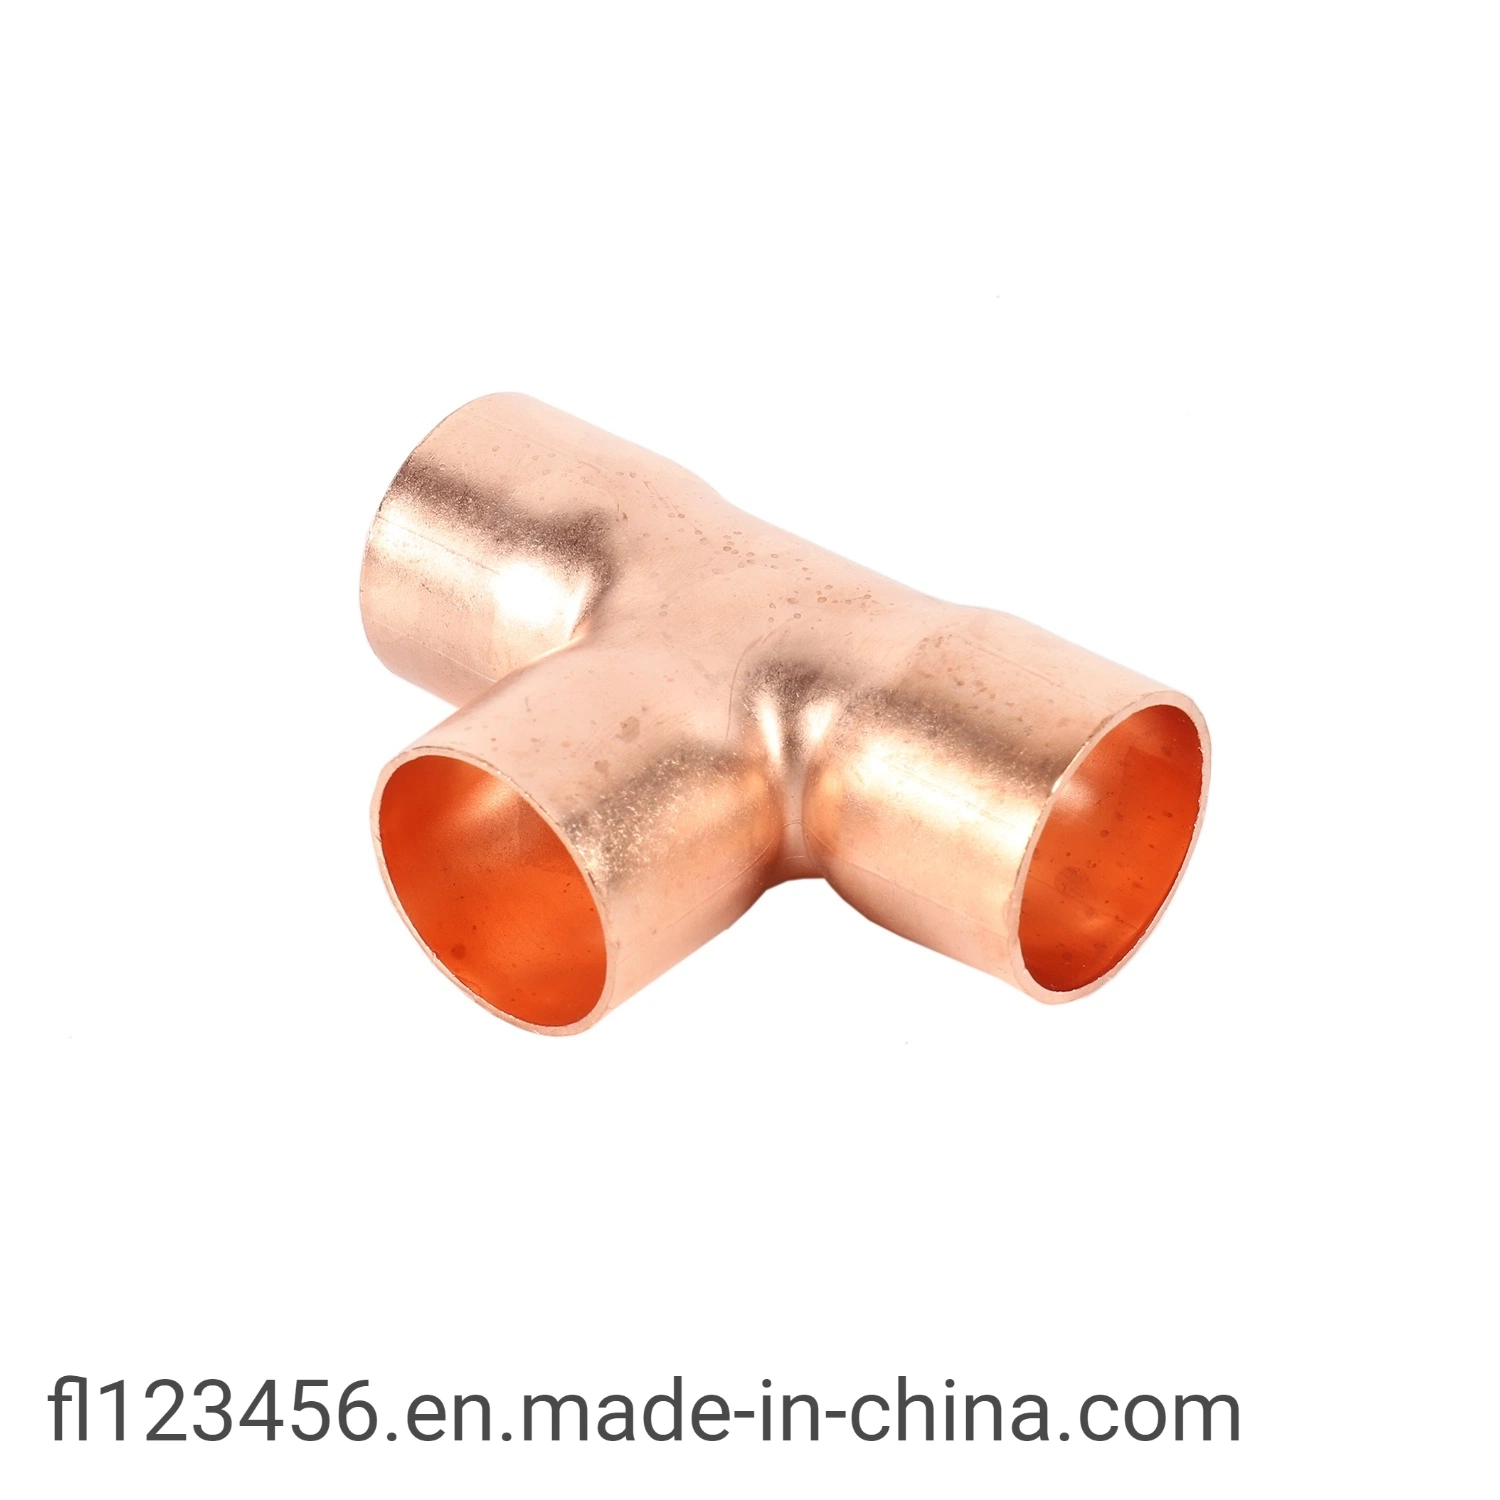 High quality/High cost performance 3 Way Tee Copper Tube Pipe Copper Pipe for Air Conditioner Copper Press Fittings